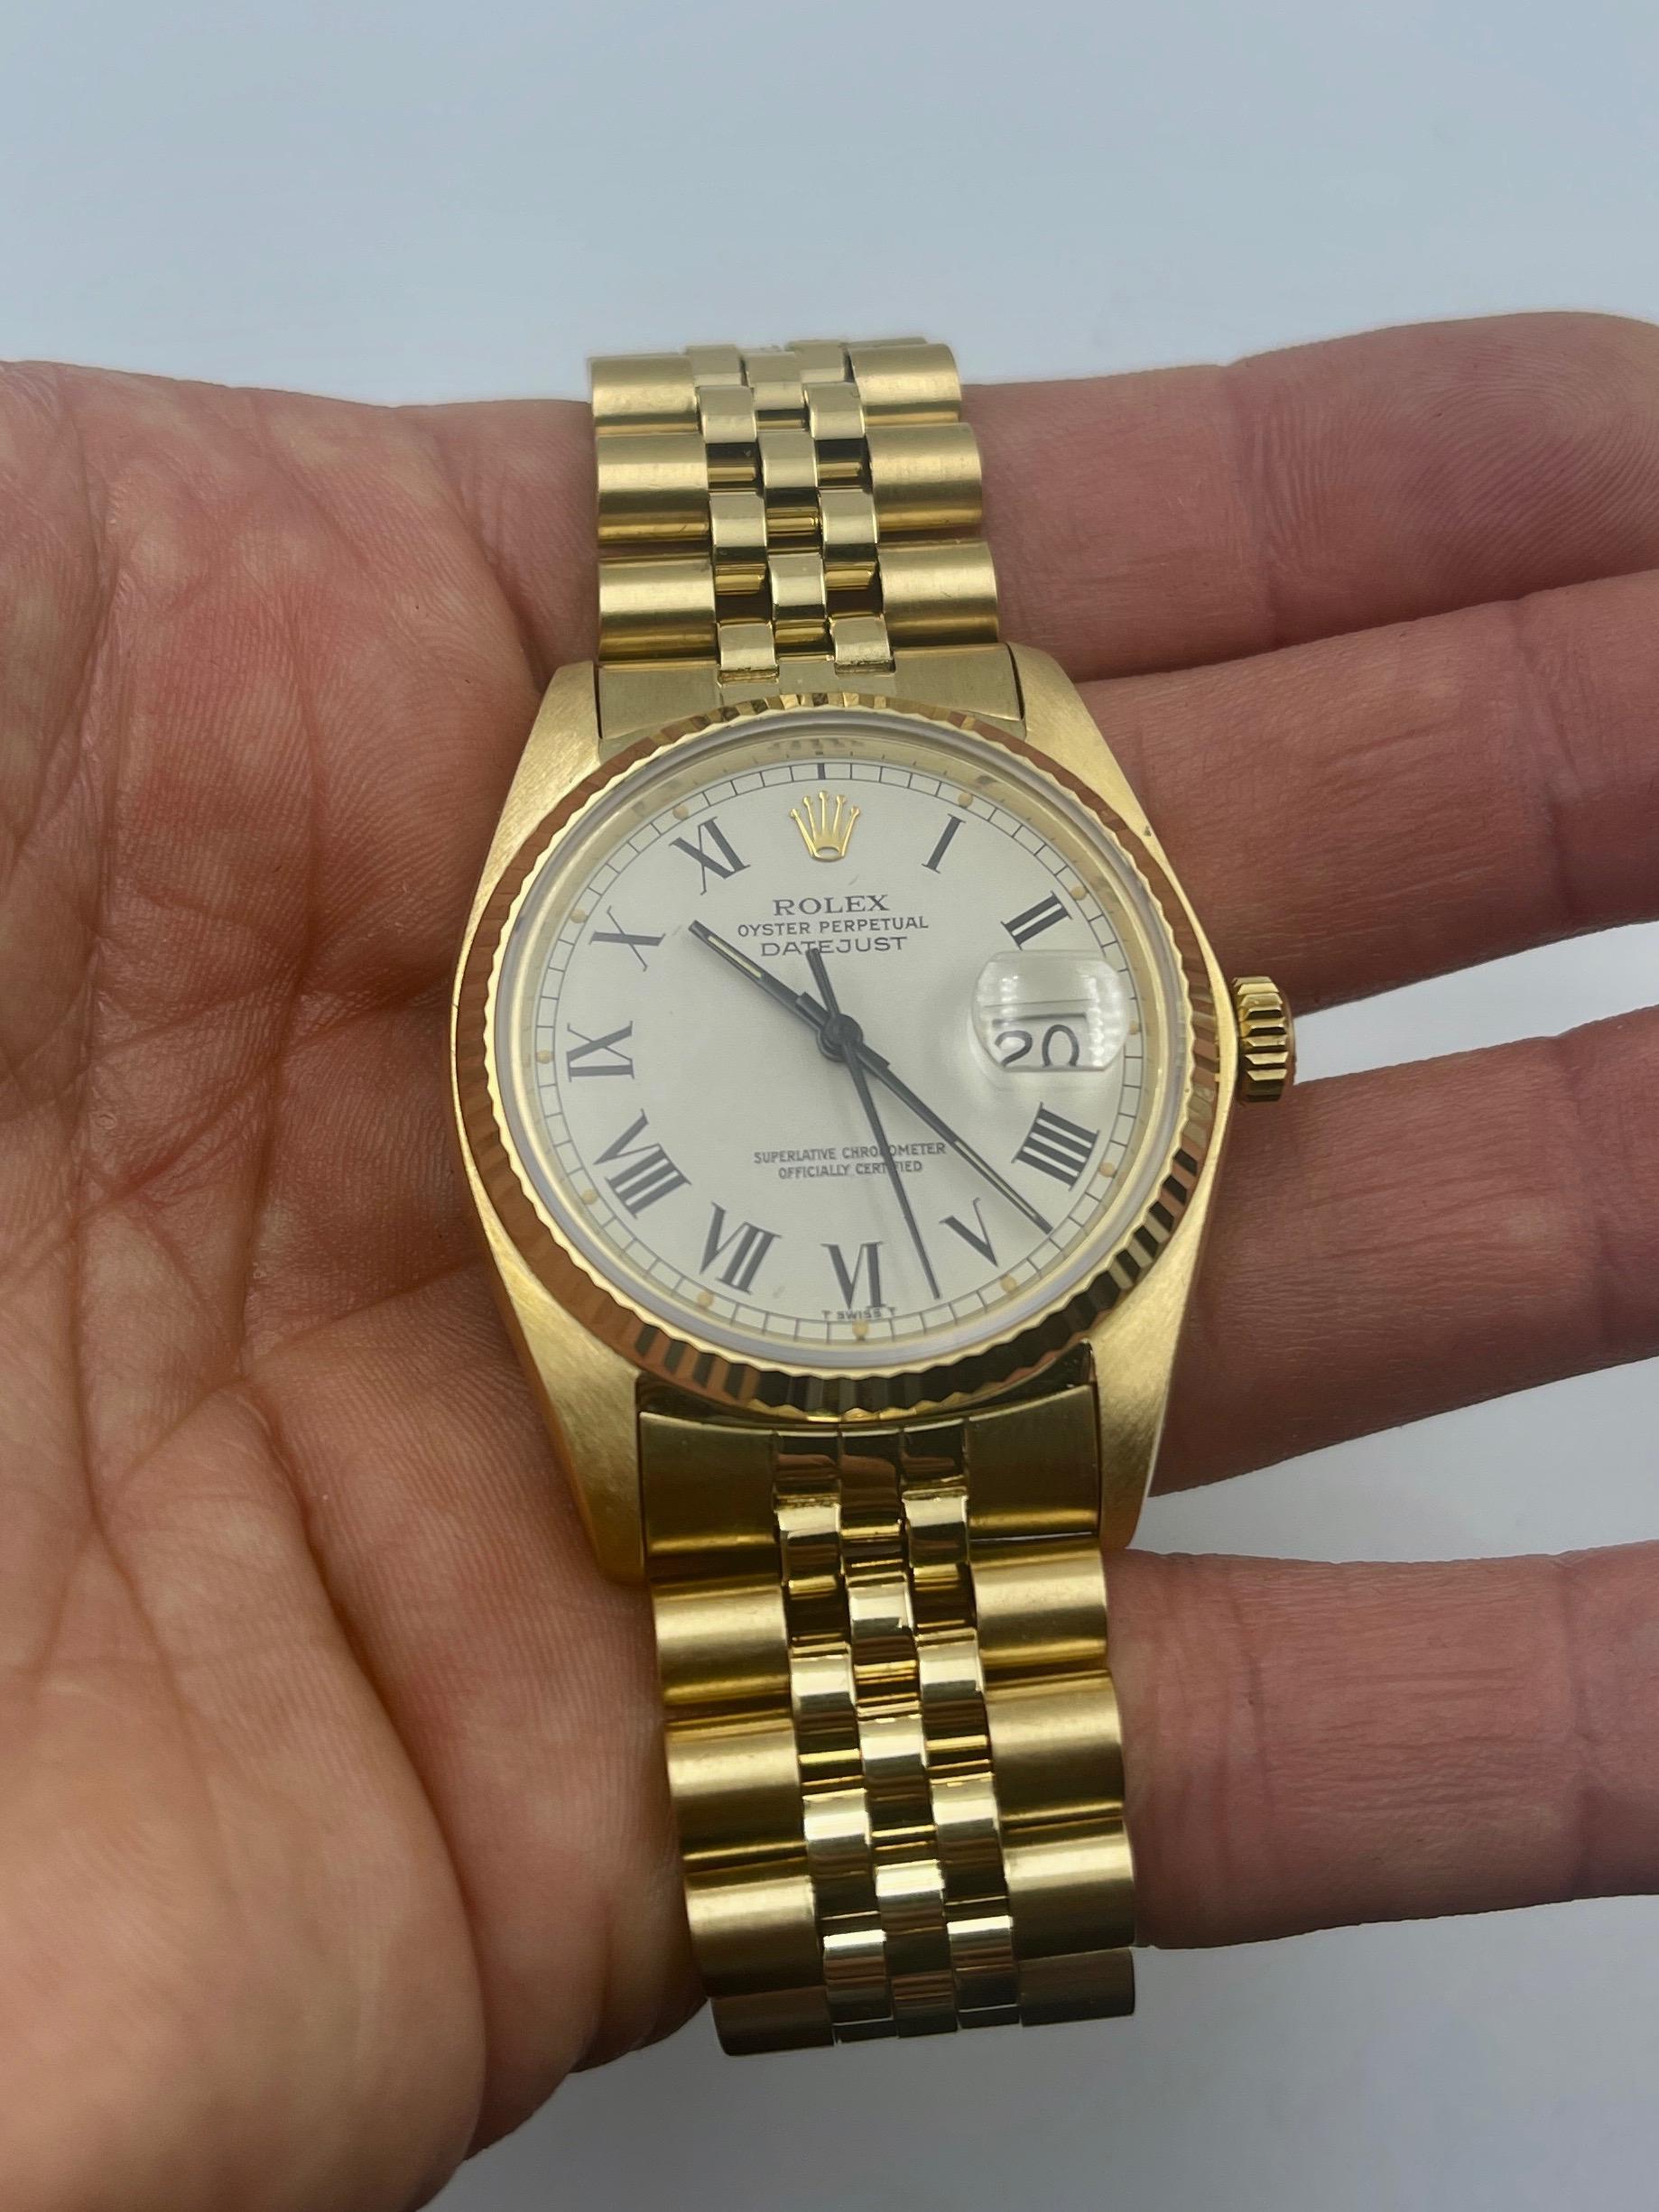 Rolex Datejust 18k Gold Reference 16018 Watch 2